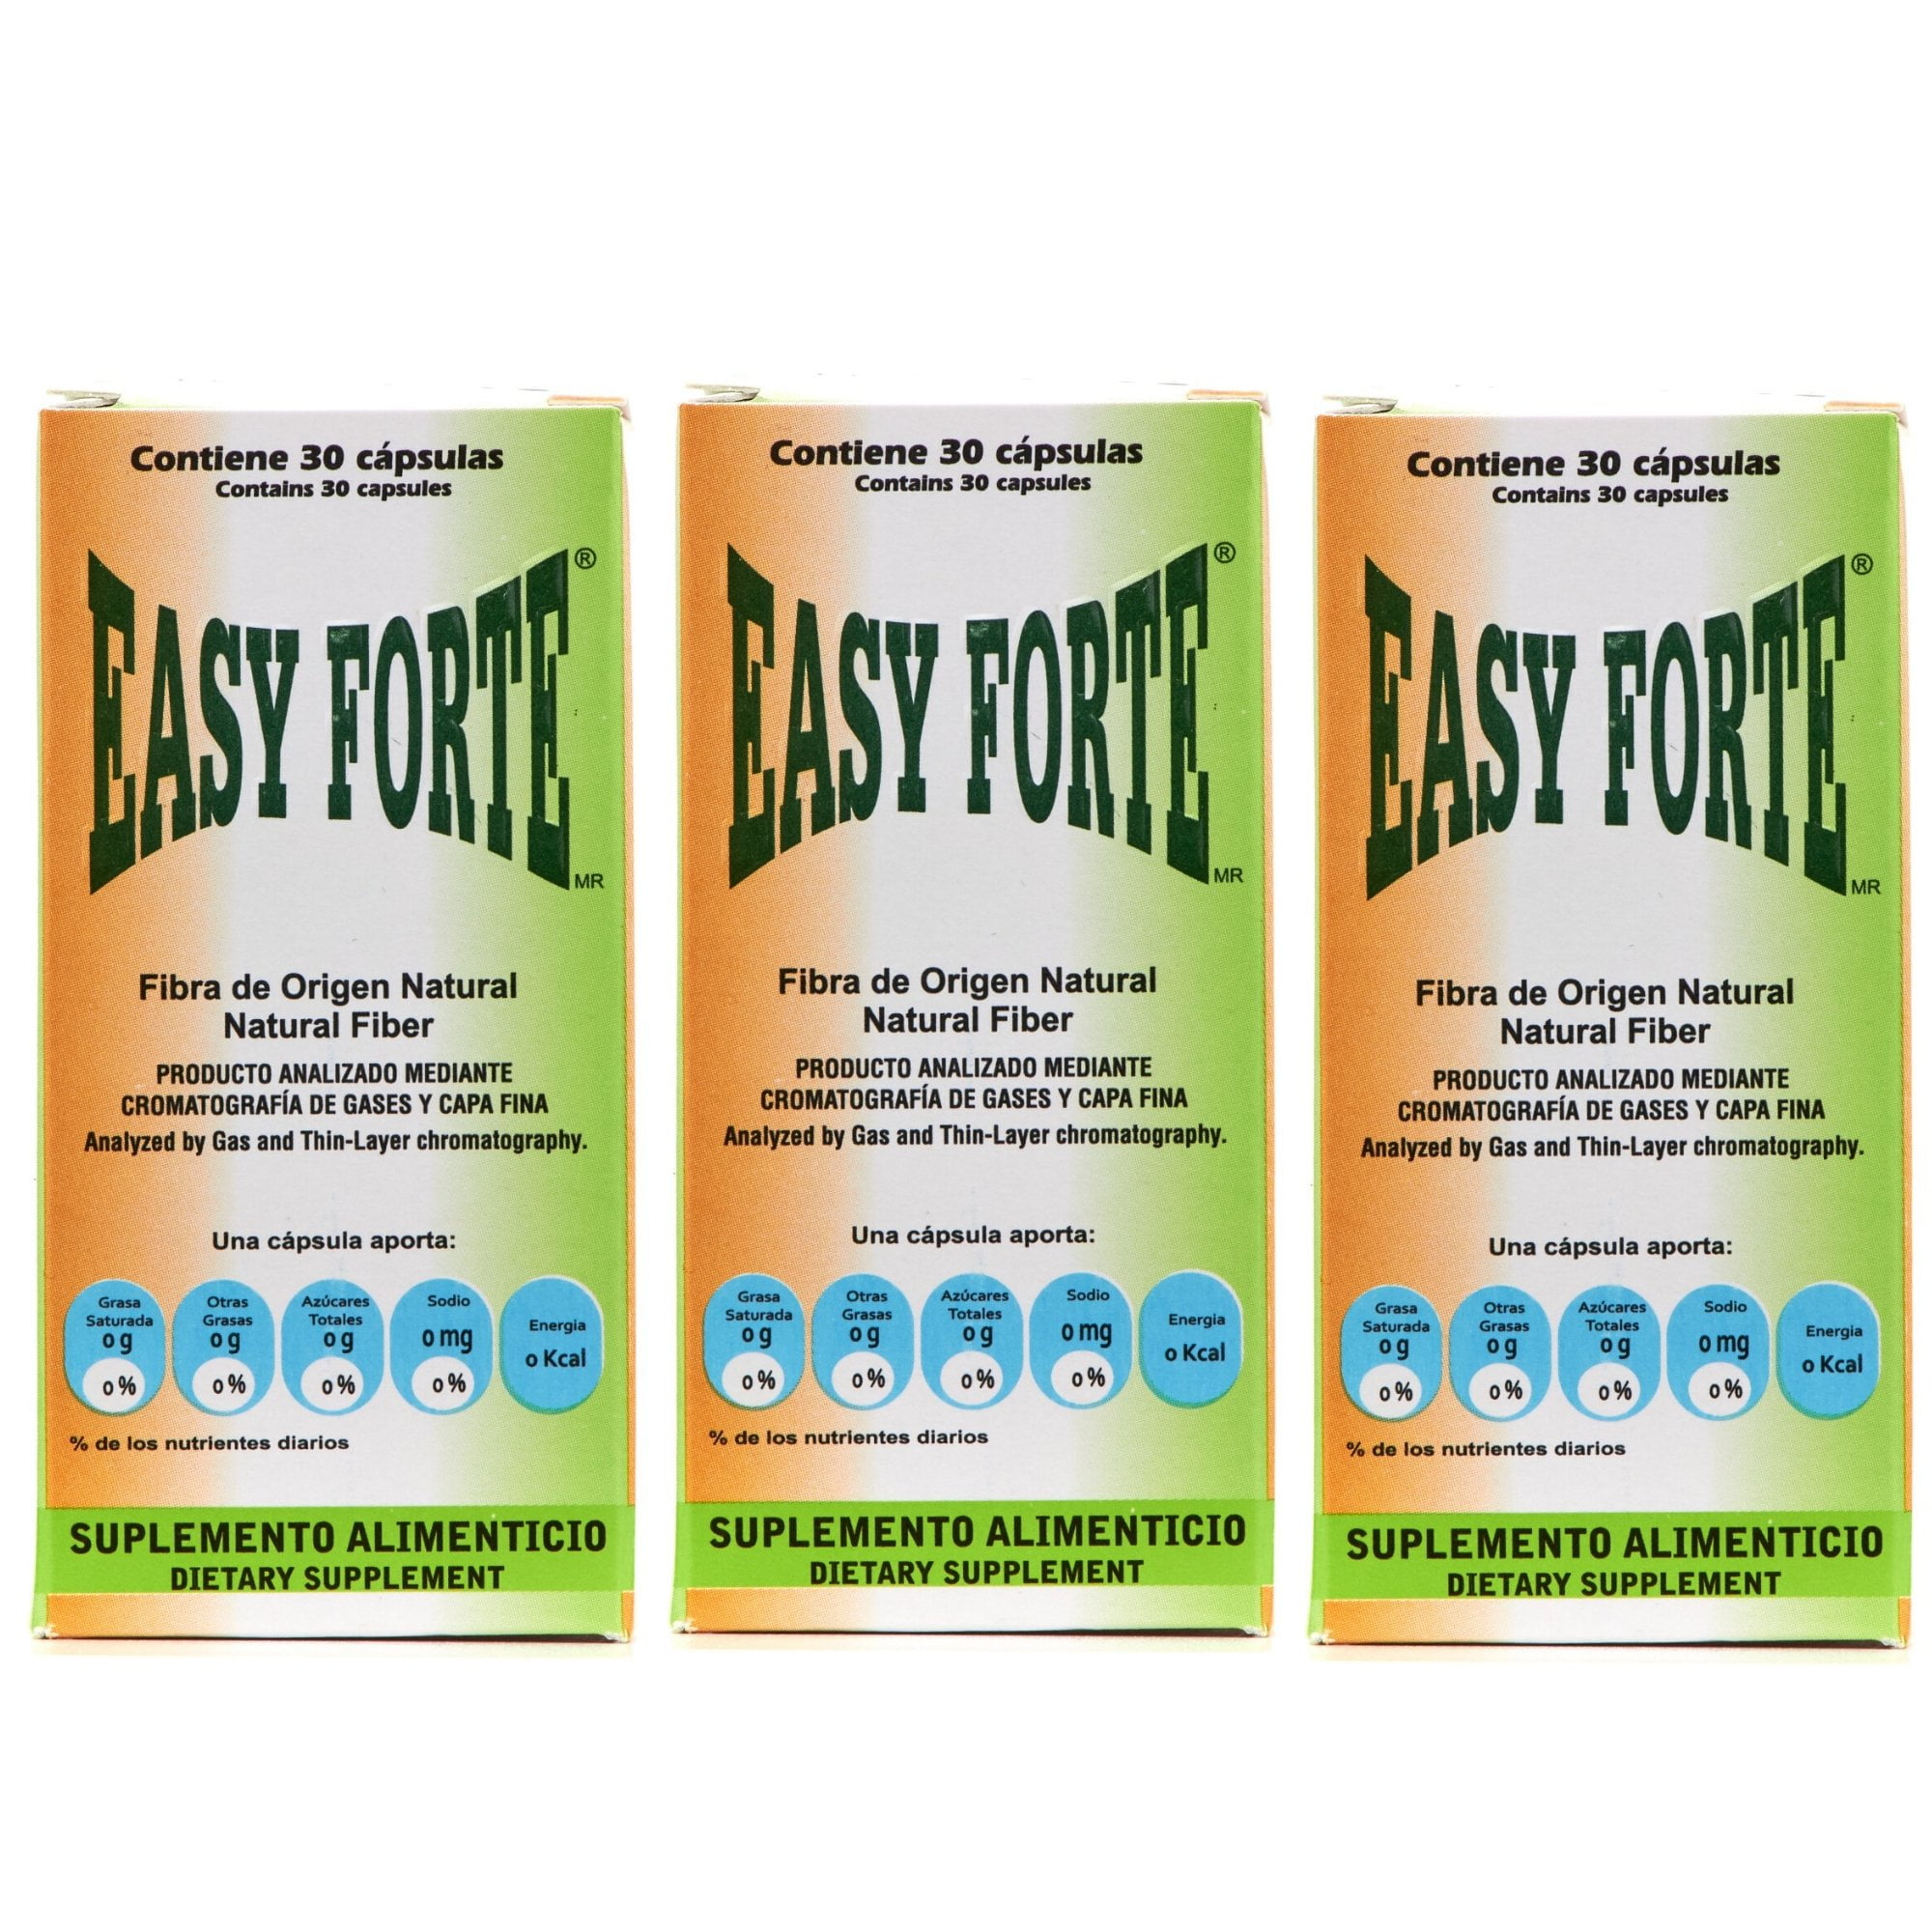 Easy Forte All-Natural Weight Loss Supplement, 30 Capsules, 3 Pack